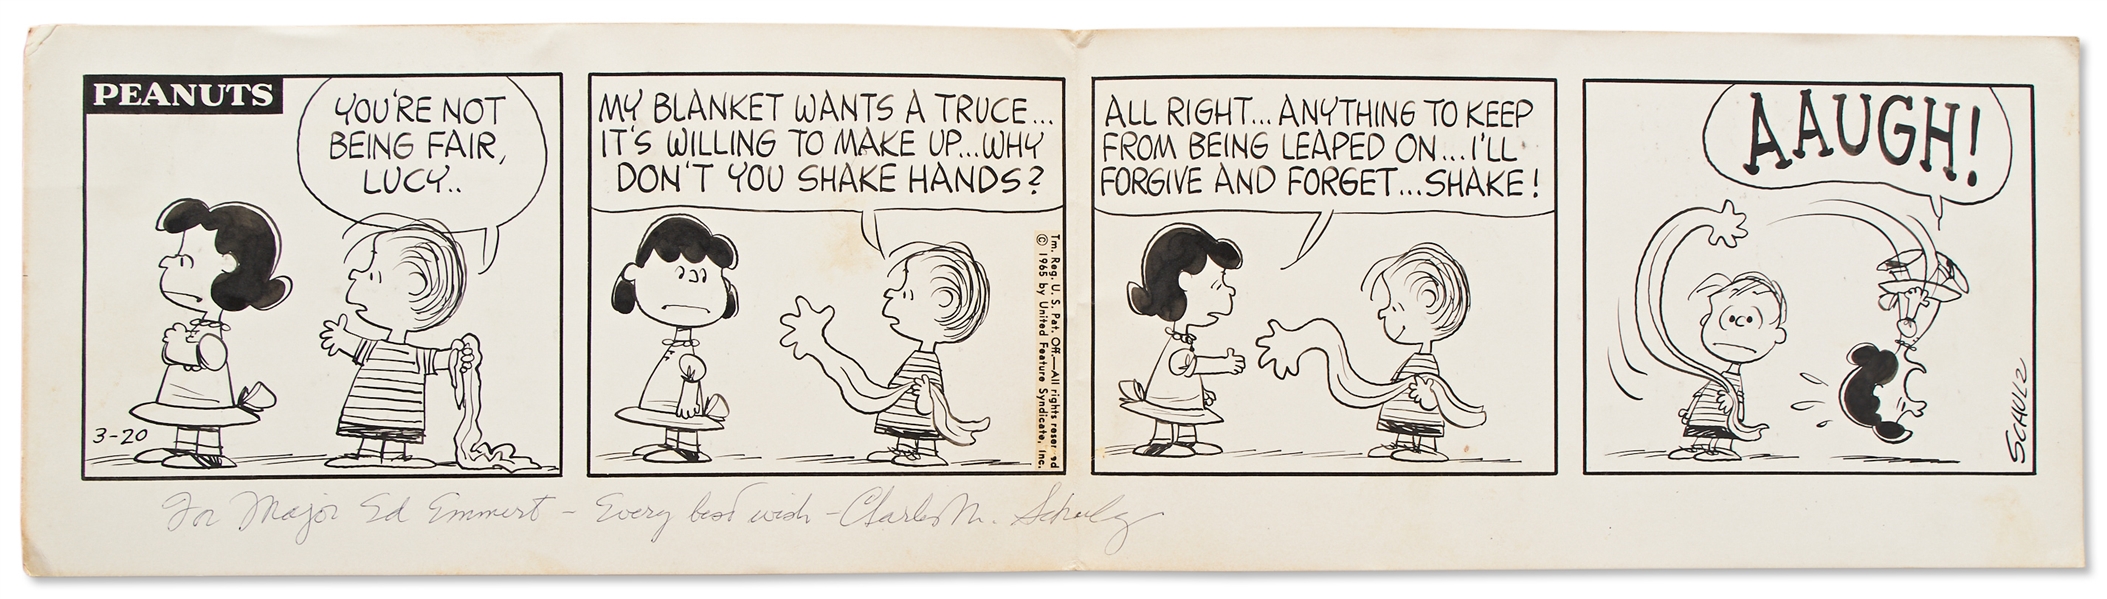 Charles Schulz Hand-Drawn Peanuts Comic Strip from 1965 -- Linus Blanket Gets Revenge on Lucy